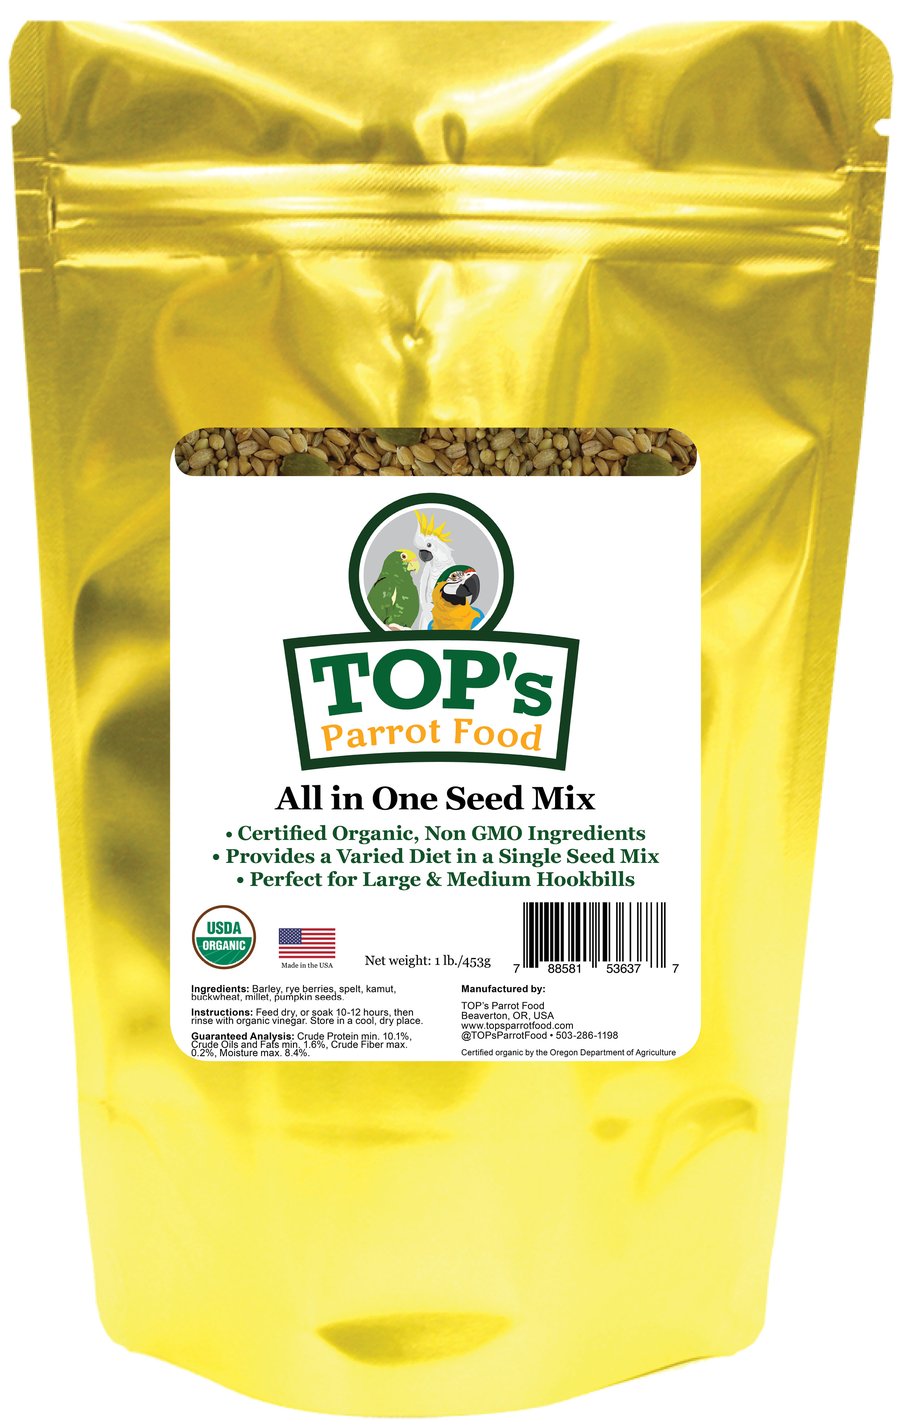 Top's All In One Seed Mix